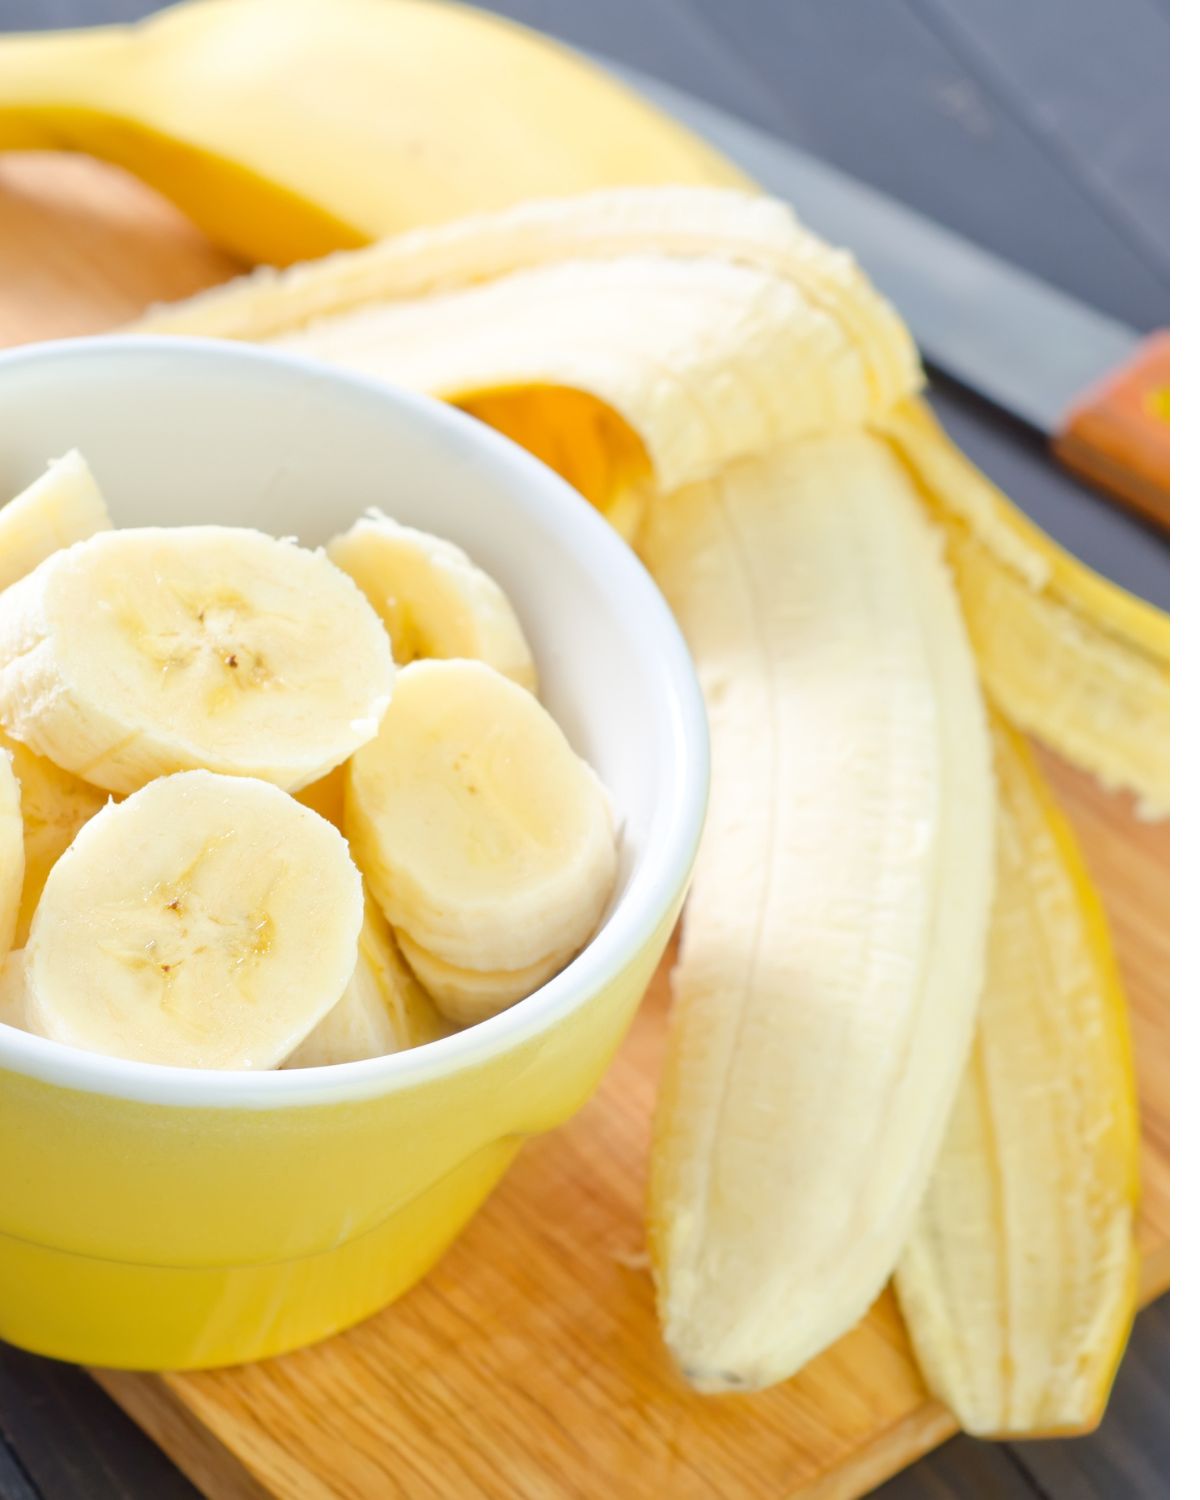 Banana slices in a yellow bowl with a whole banana on the side. 